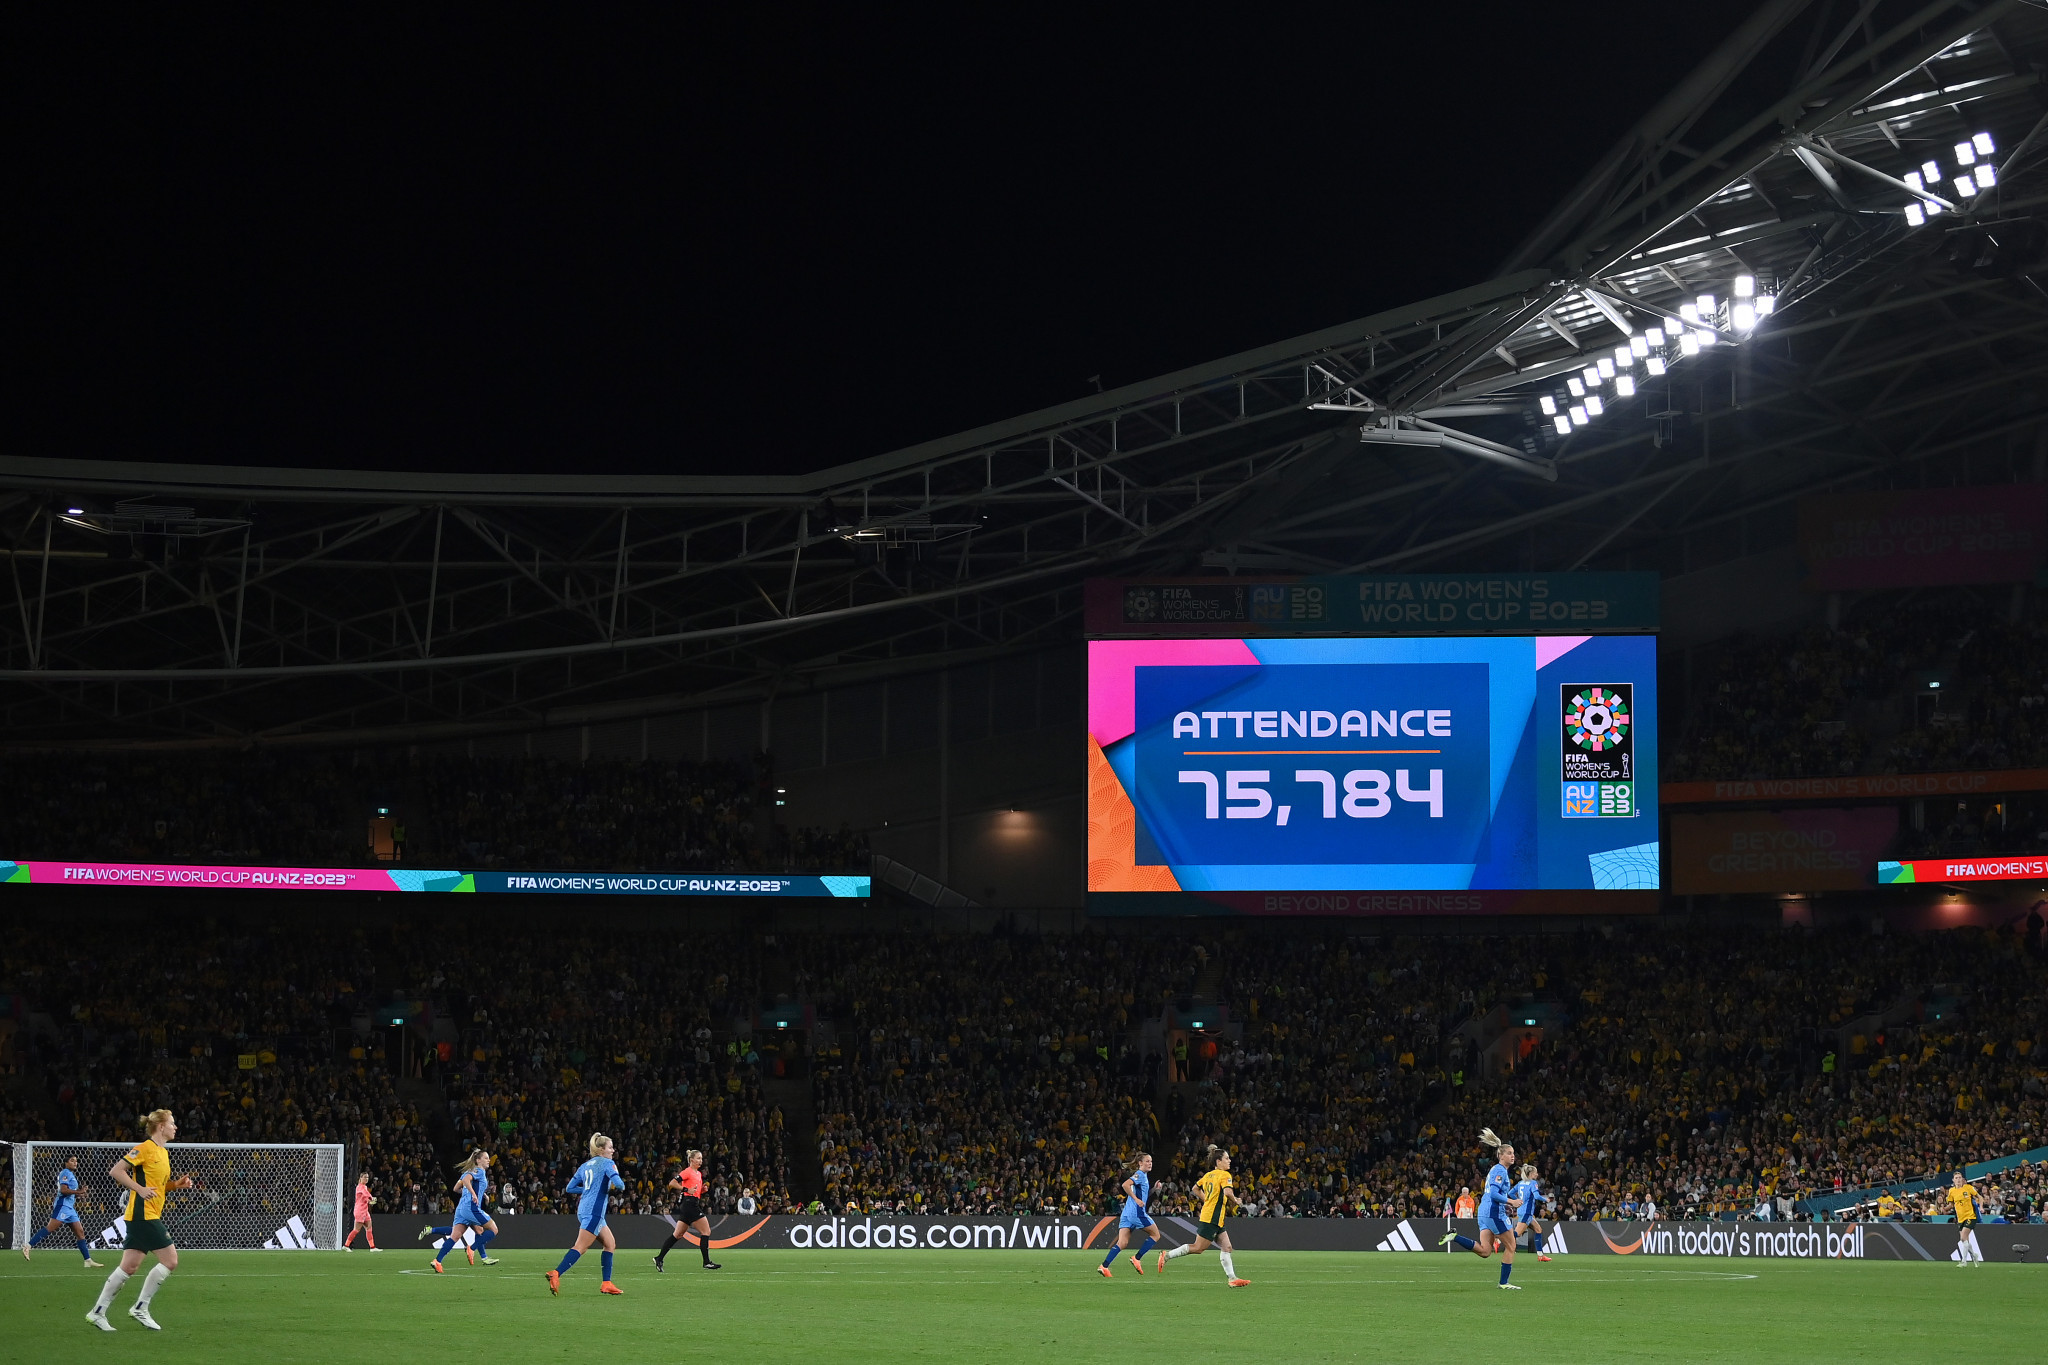 The attendance for the second semi-final between Australia and England is displayed on the screens at Stadium Australia ©Getty Images